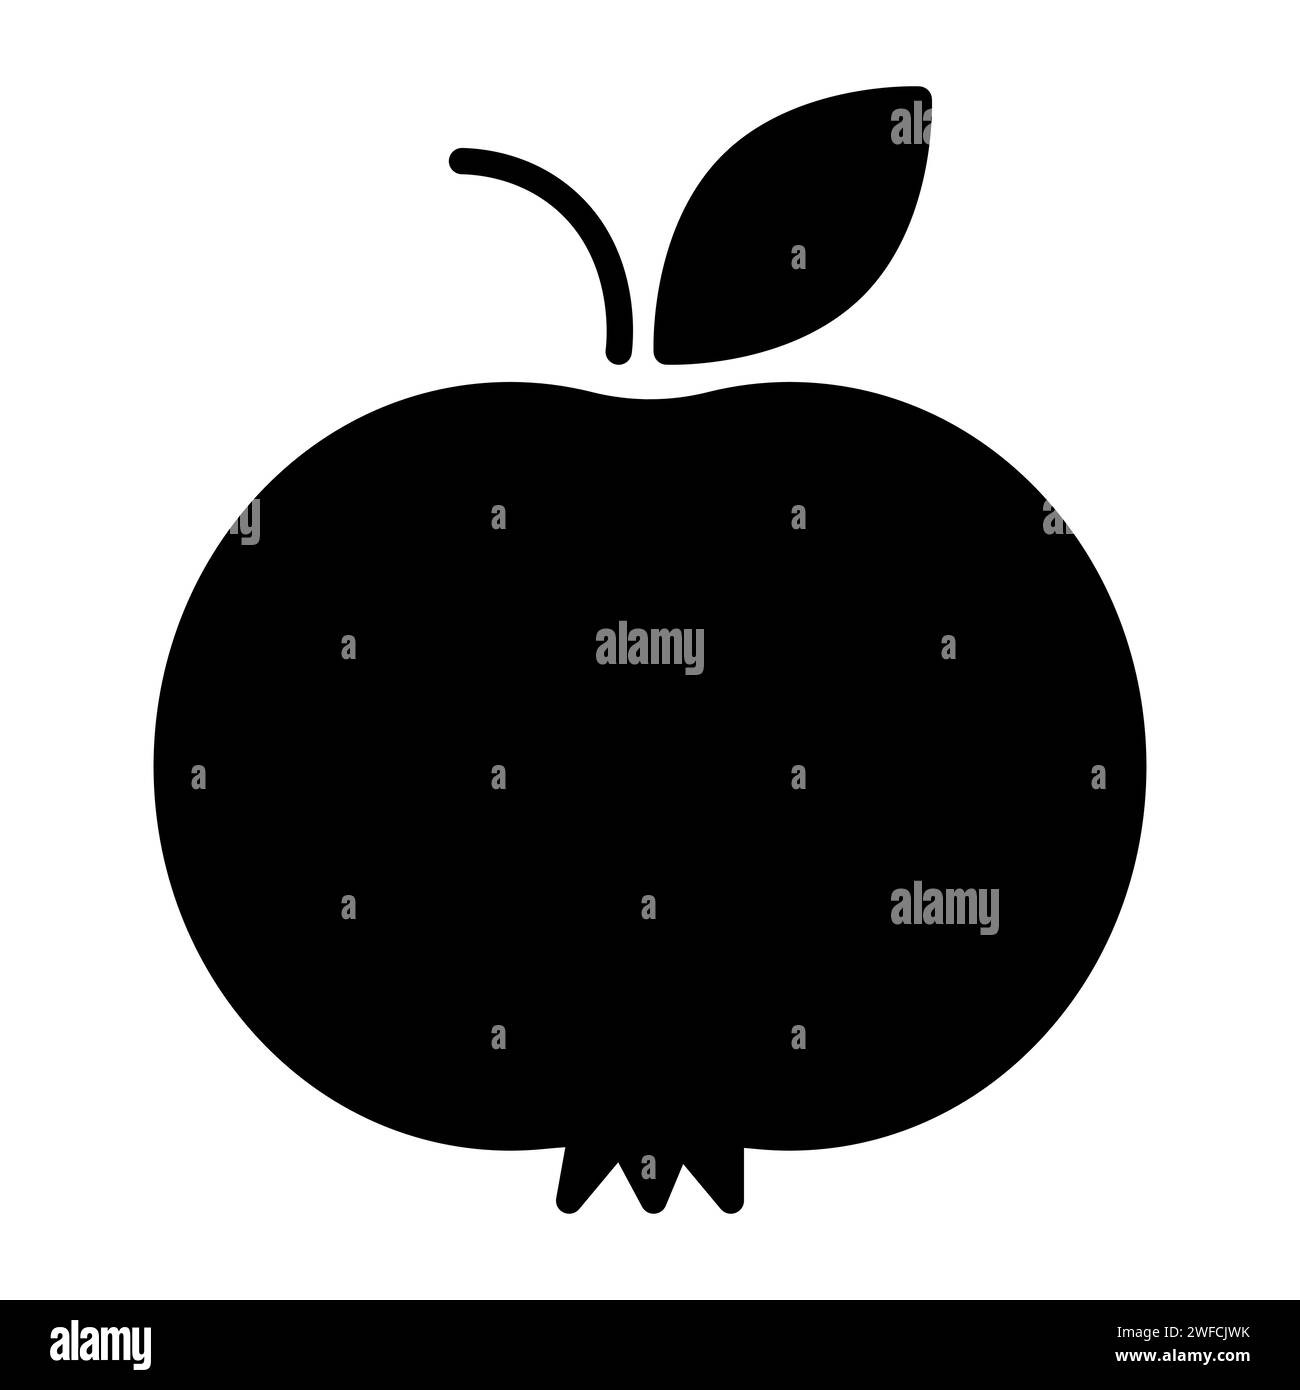 Black and white apple. Food illustration. Engraved style. Vector illustration. stock image. EPS 10. Stock Vector